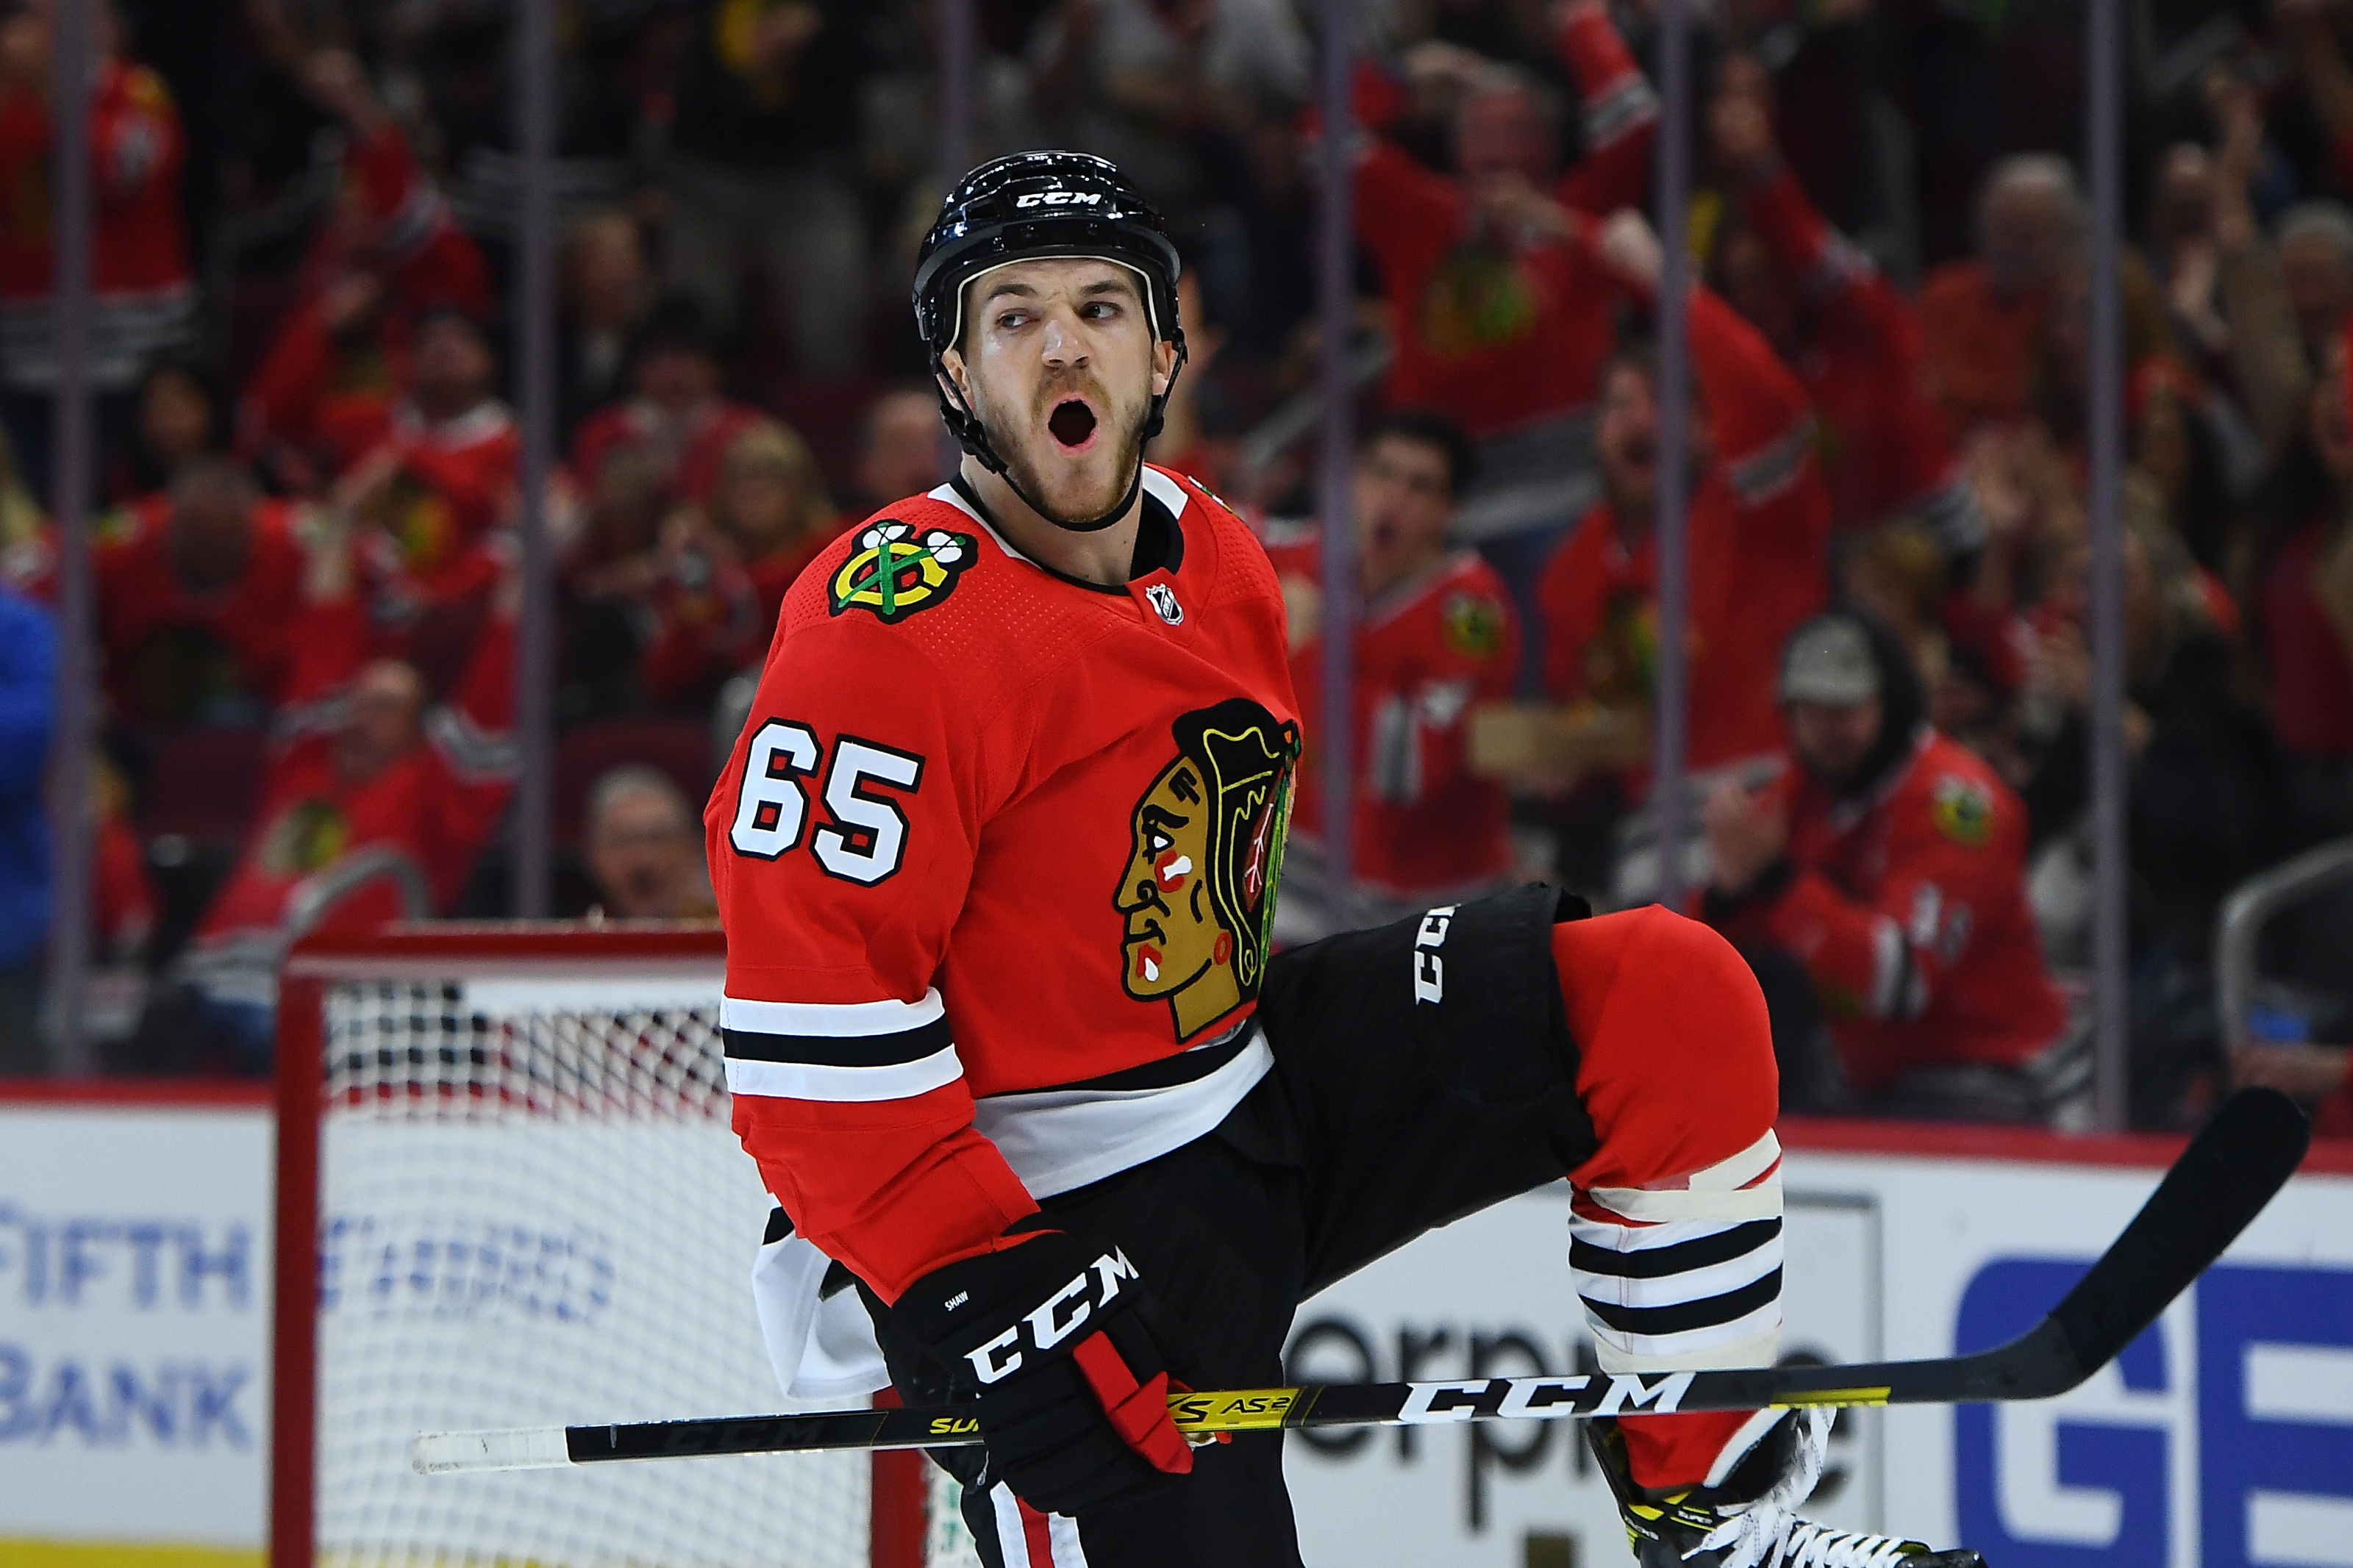 Beating the odds is Blackhawks forward Andrew Shaw's game